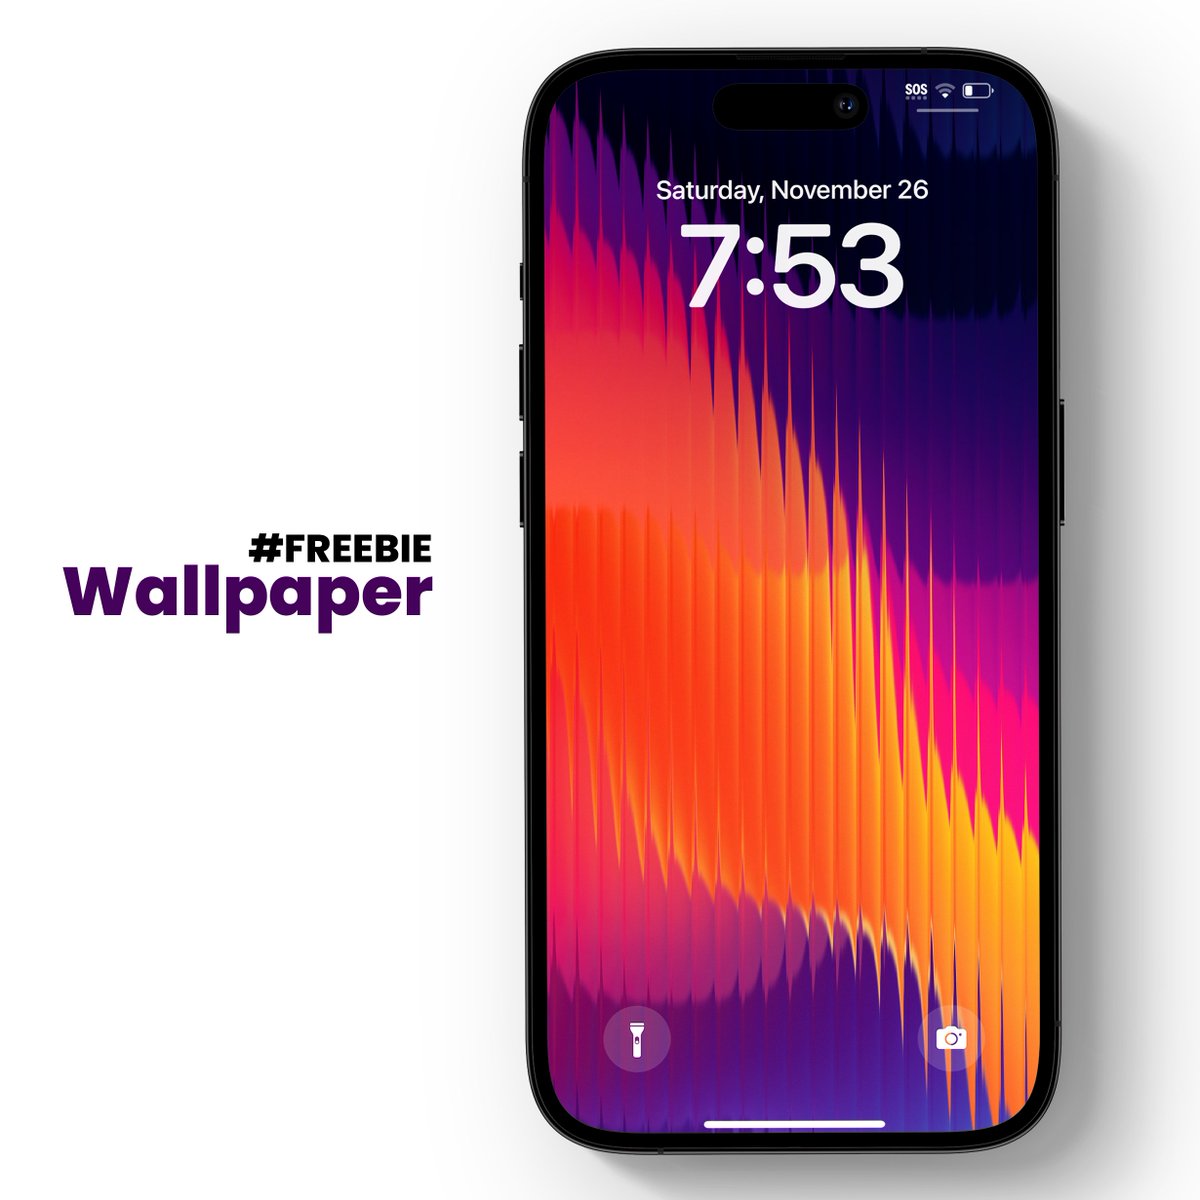 #Freebie Get this Premium Wallpaper for FREE, A Perfect one for your Home/Lockscreen ♥ It's super easy • Follow me @papers_app • Retweet & like this post & mention 🔥 emoji in comment I will send you the download link straight to your inbox. Enjoy! #Wallpaper #gradientglass